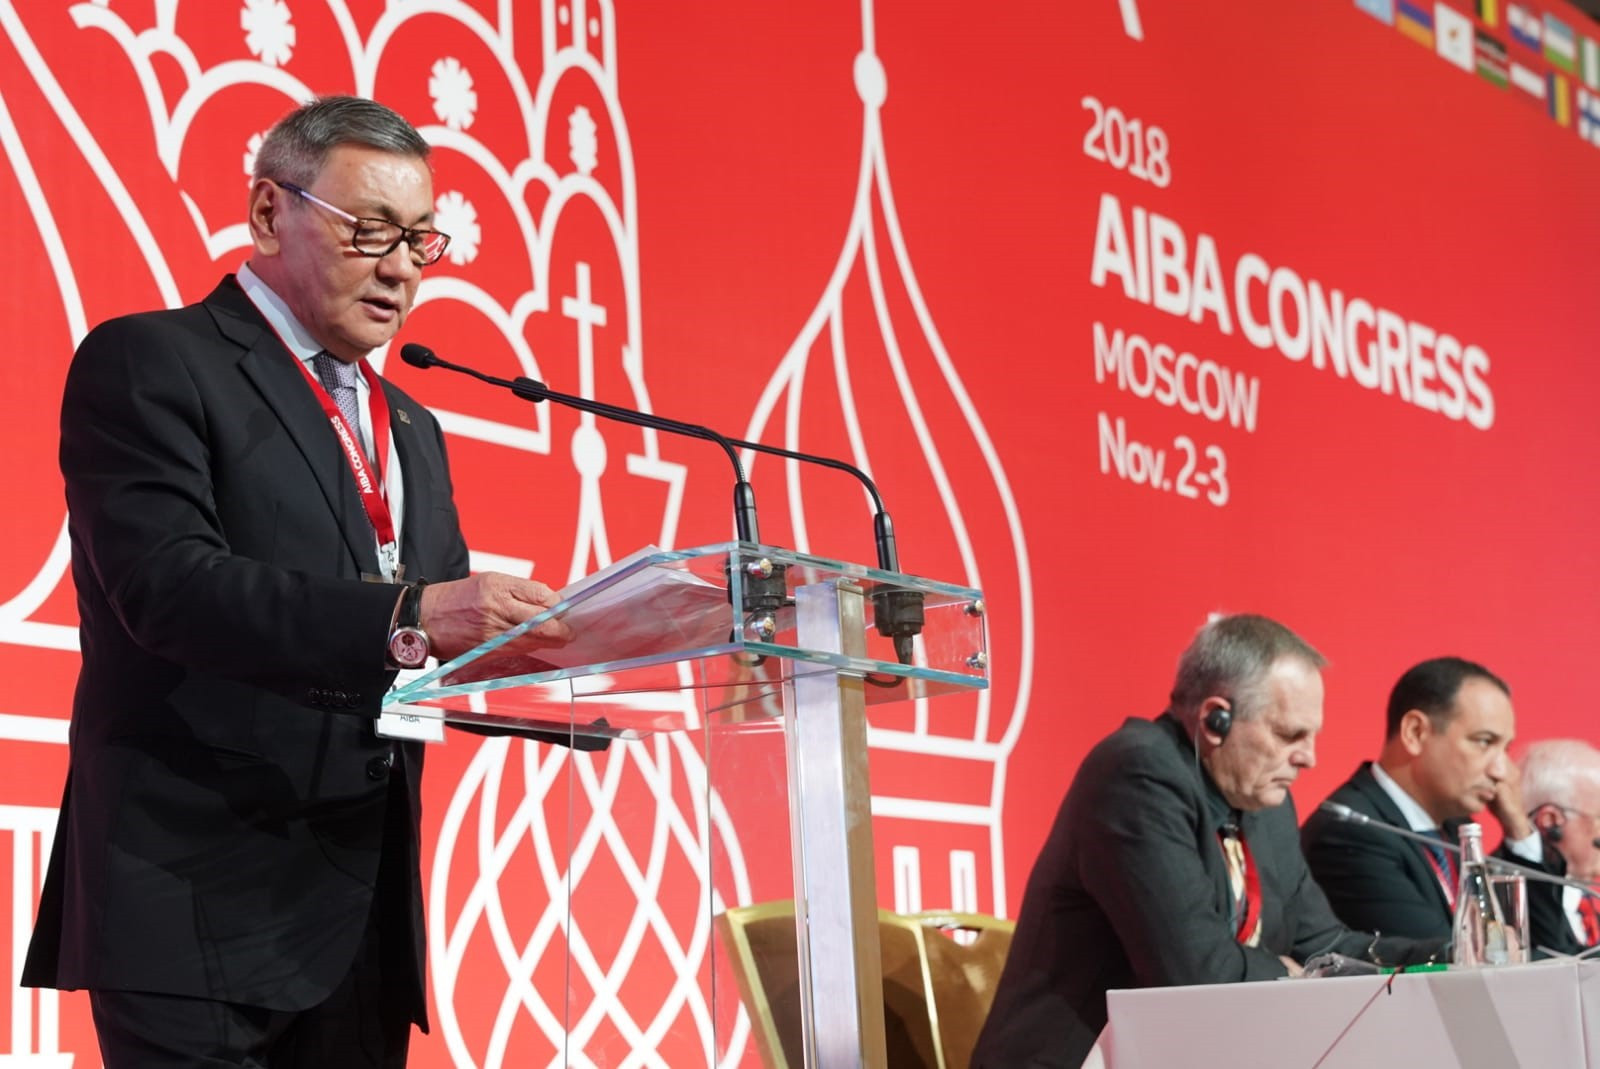 AIBA Interim President Gafur Rakhimov has claimed that he is working closely with the IOC to ensure boxing remains on the Olympic programme ©AIBA